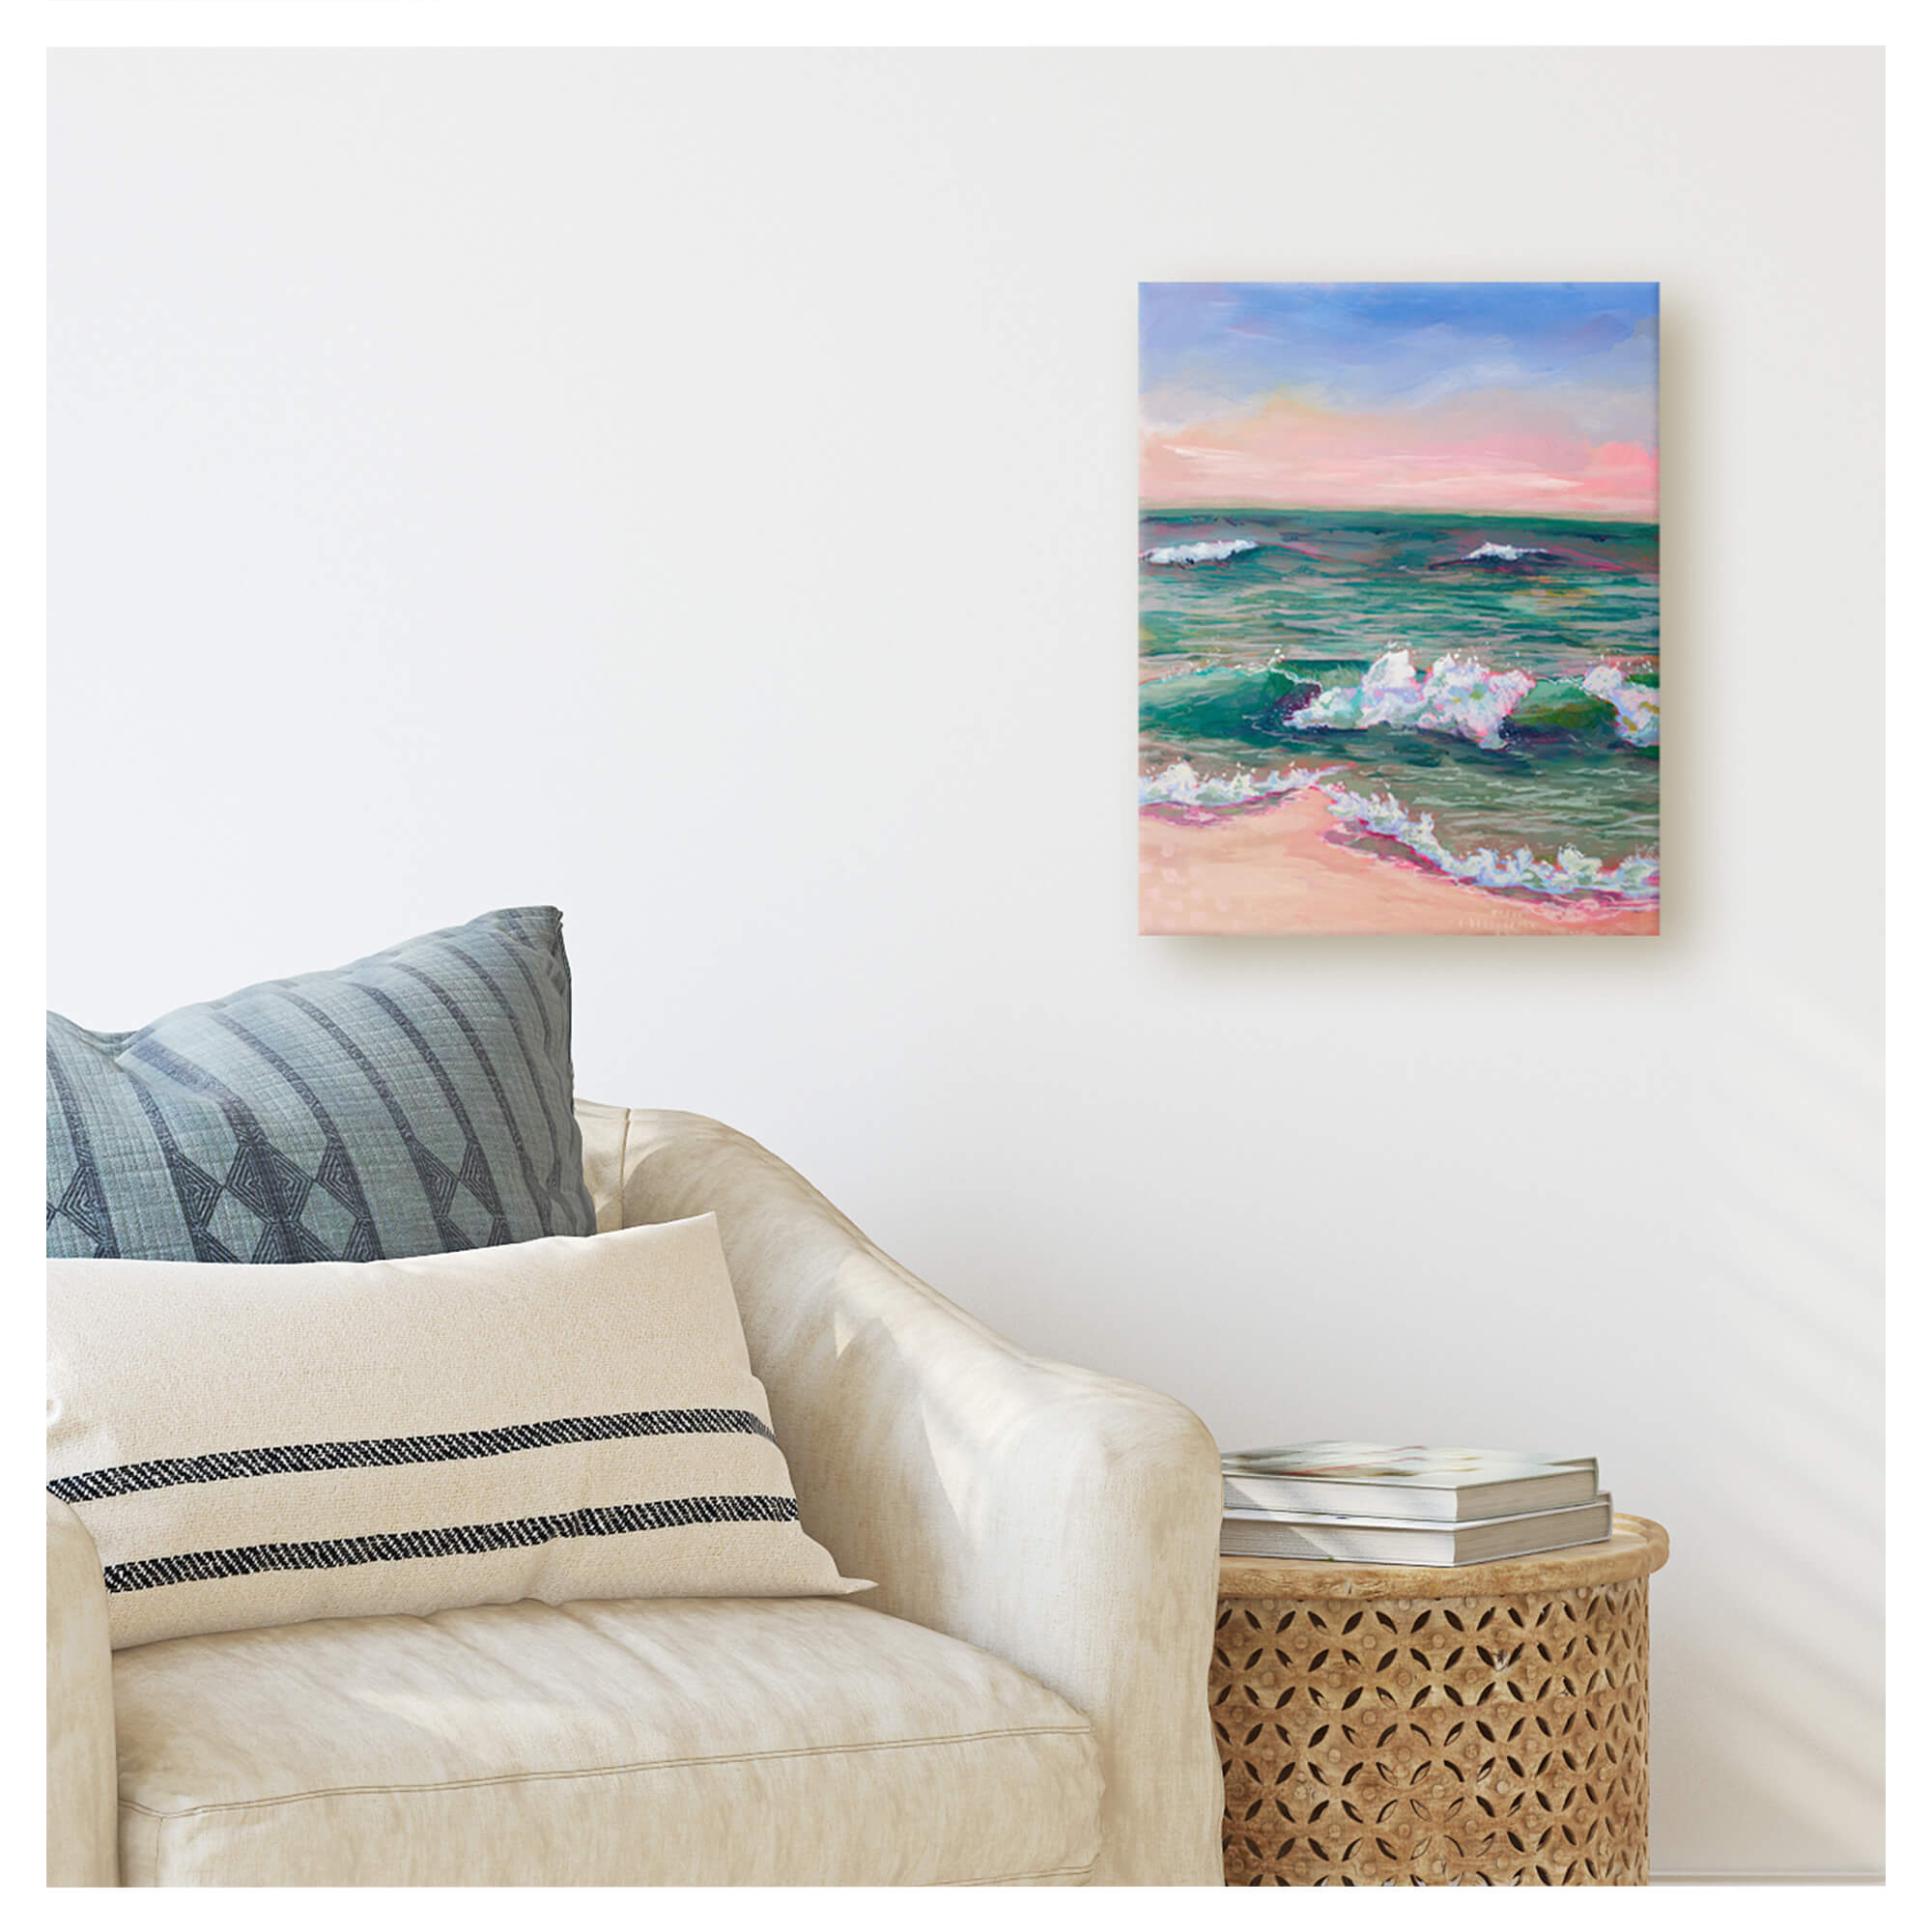 A painting on canvas depicting a seascape with green ocean water and pink sky Hawaii artist Lindsay Wilkins